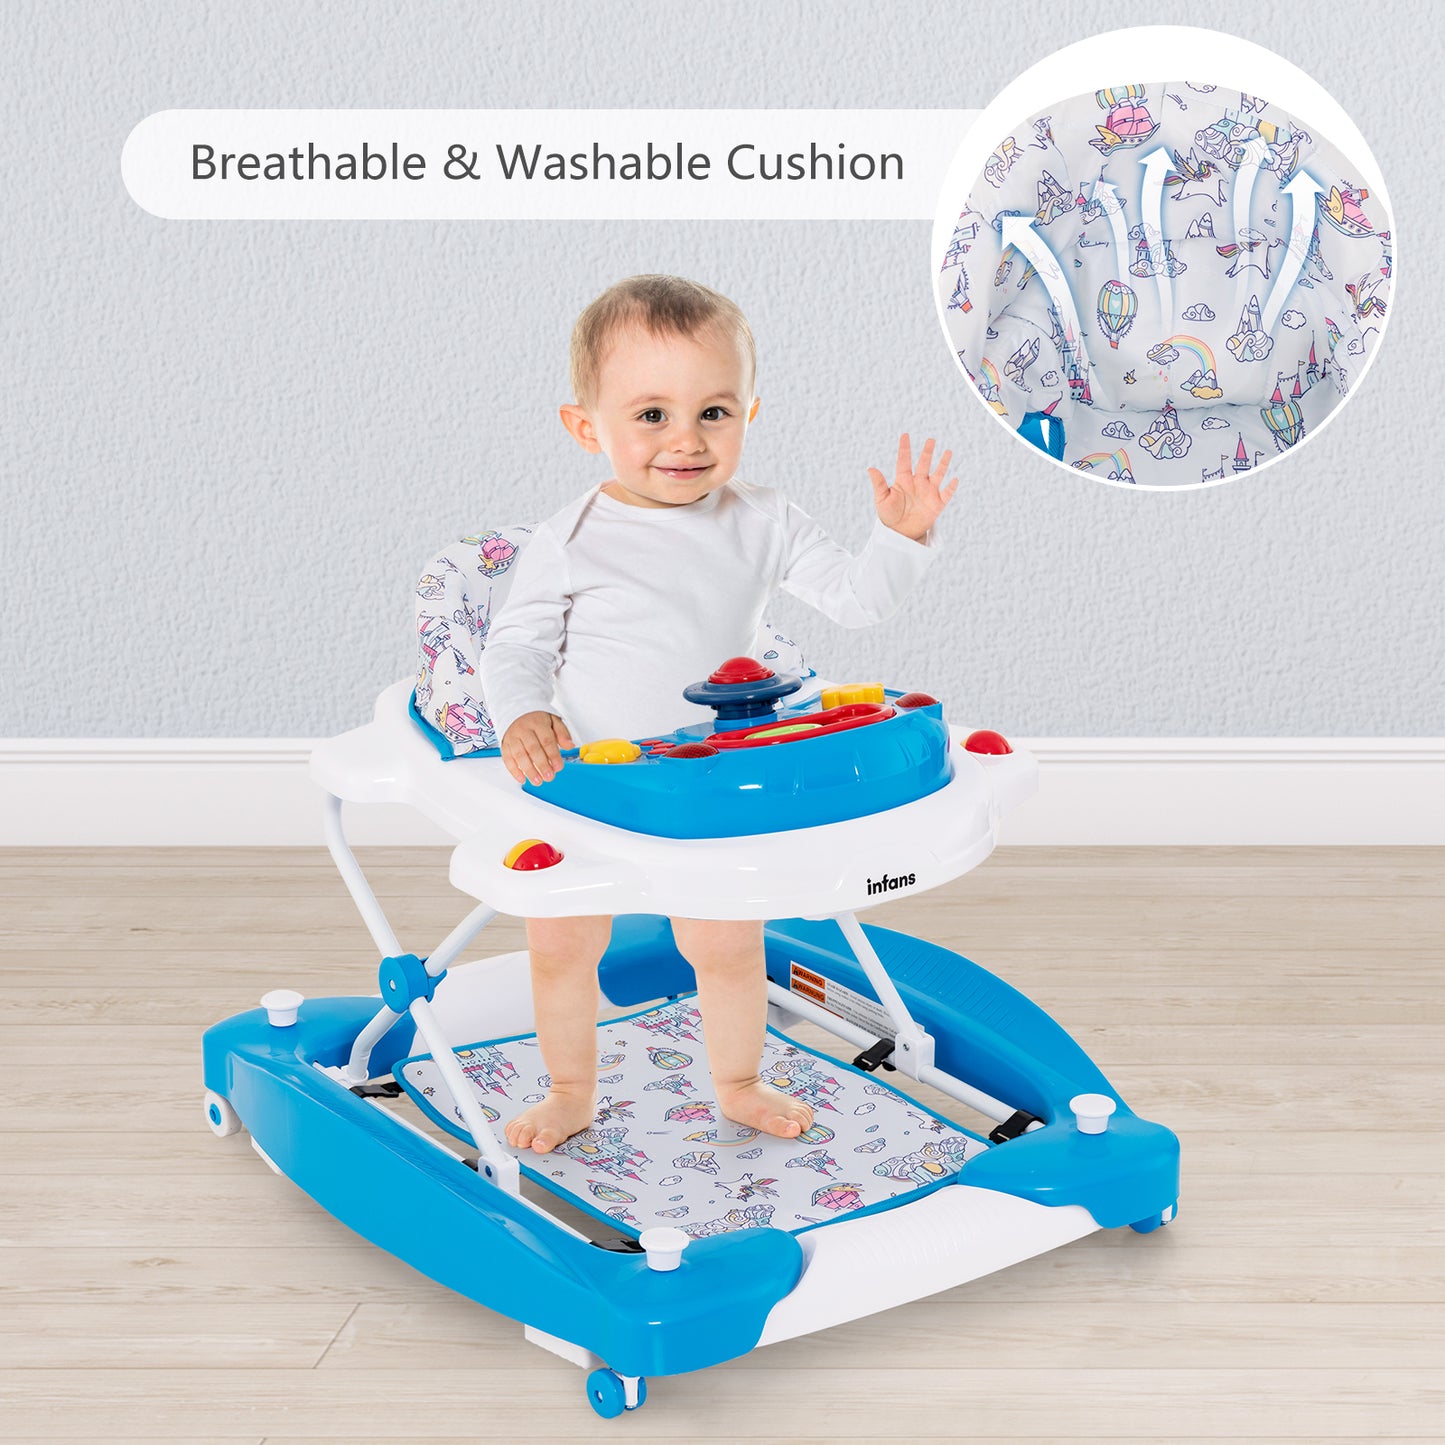 INFANS Baby Walker, 5 in 1 Behind Walker Learning Seated Rocker Bouncer with Removable Music Tray, Adjustable Height and Speed, Washable Seat Cushion, Foldable Activity Center for Toddlers